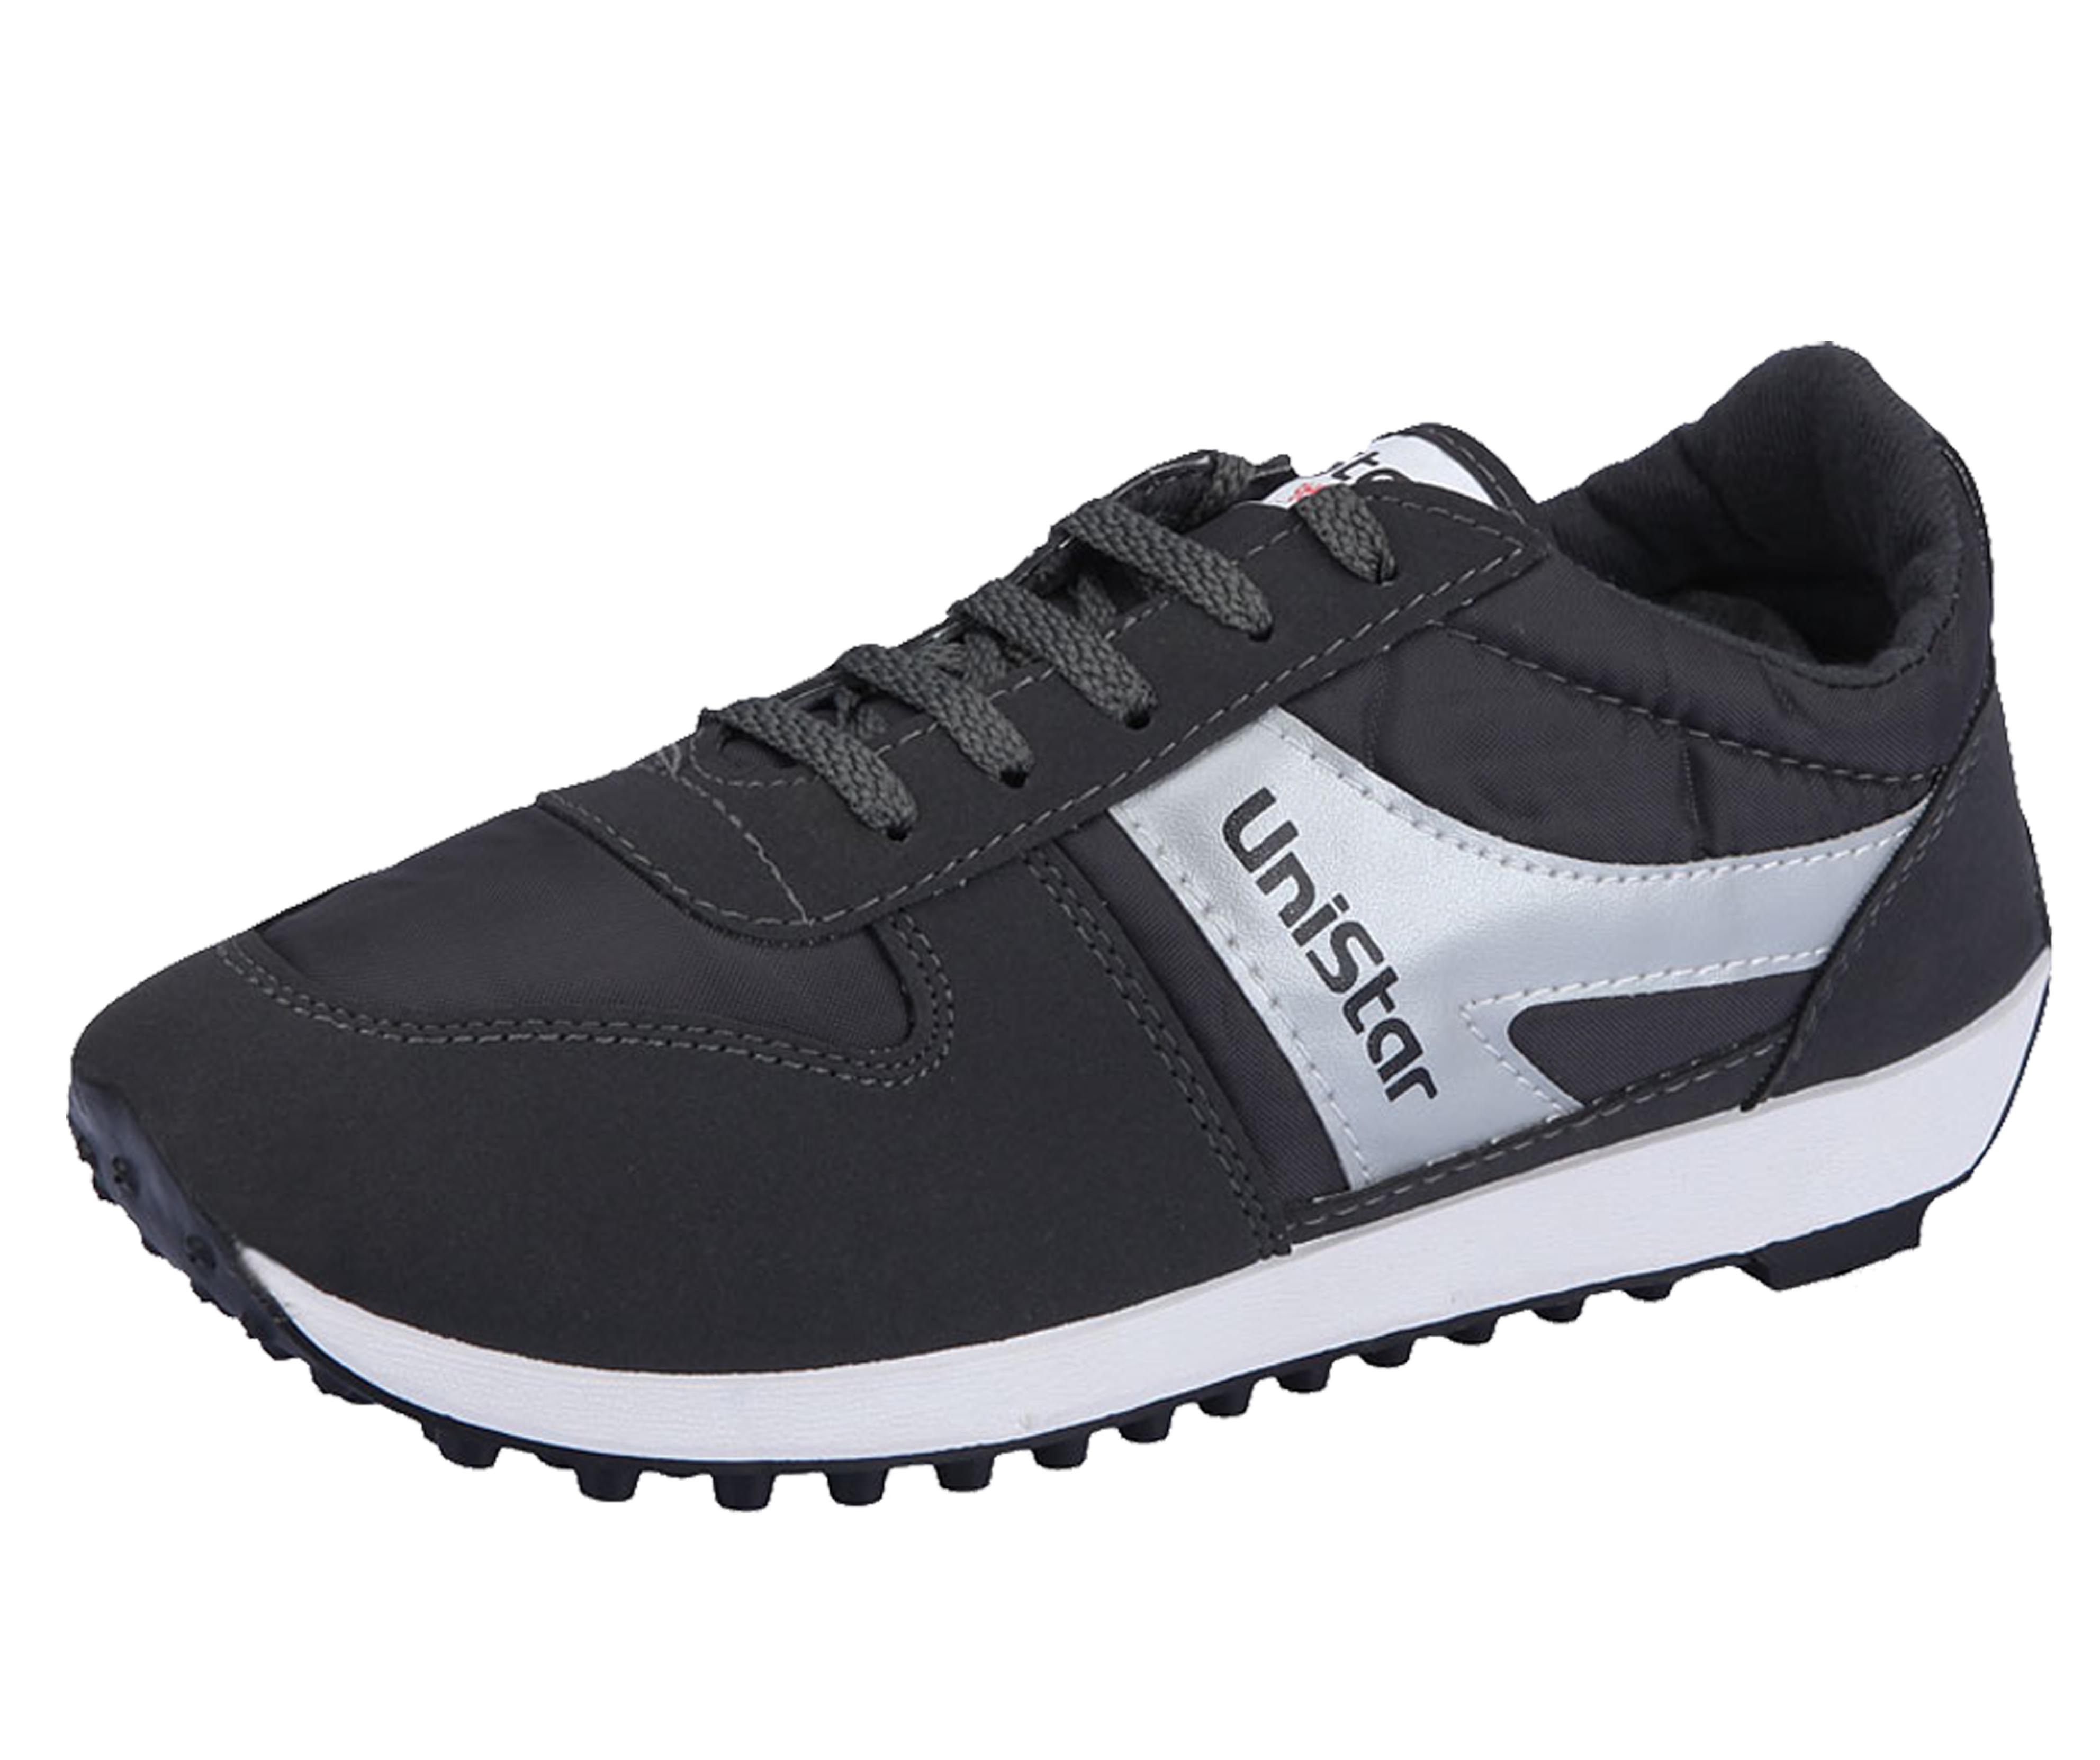 Buy Unistar Mens Multicolor Running Shoes Online @ ₹329 from ShopClues